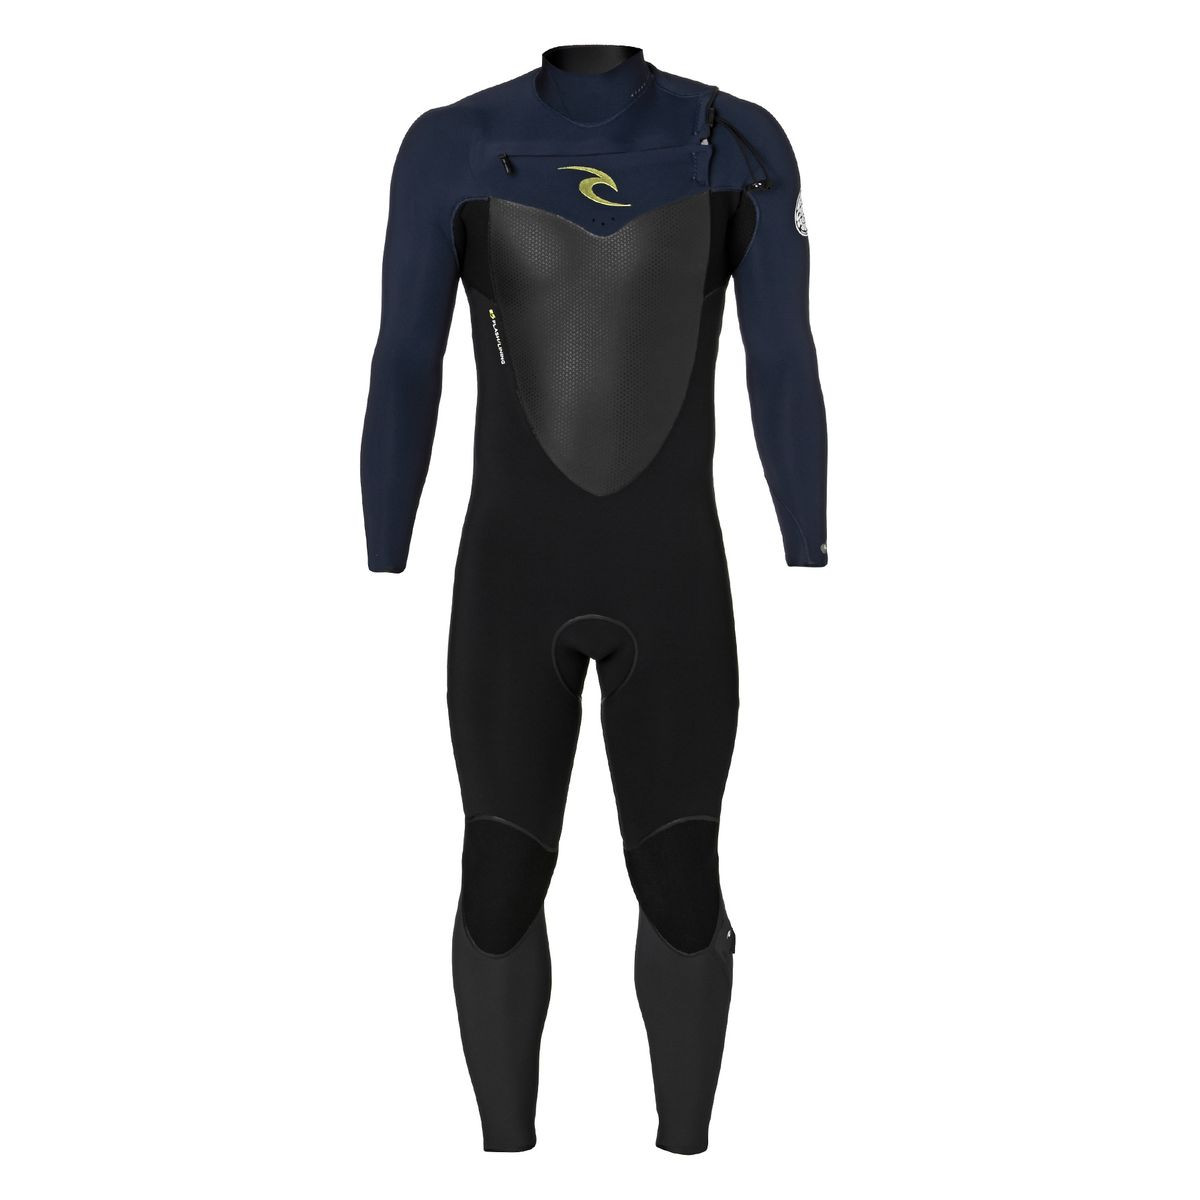 Rip Curl Flashbomb 4/3mm 2017 Chest Zip Wetsuit - Navy